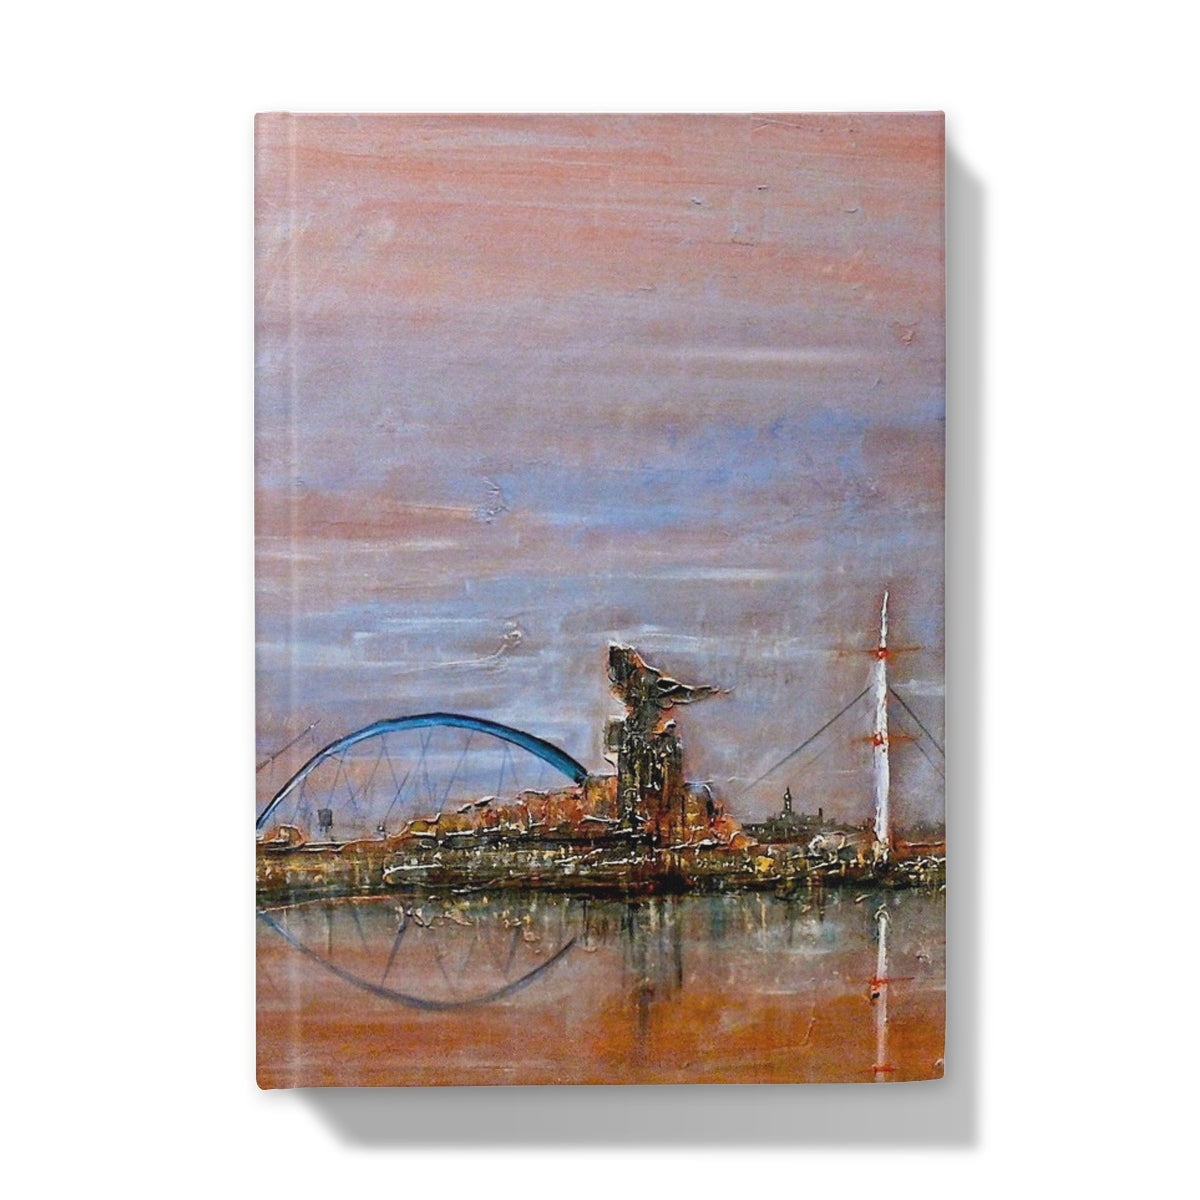 Glasgow Harbour Art Gifts Hardback Journal-Journals & Notebooks-Edinburgh & Glasgow Art Gallery-A5-Lined-Paintings, Prints, Homeware, Art Gifts From Scotland By Scottish Artist Kevin Hunter